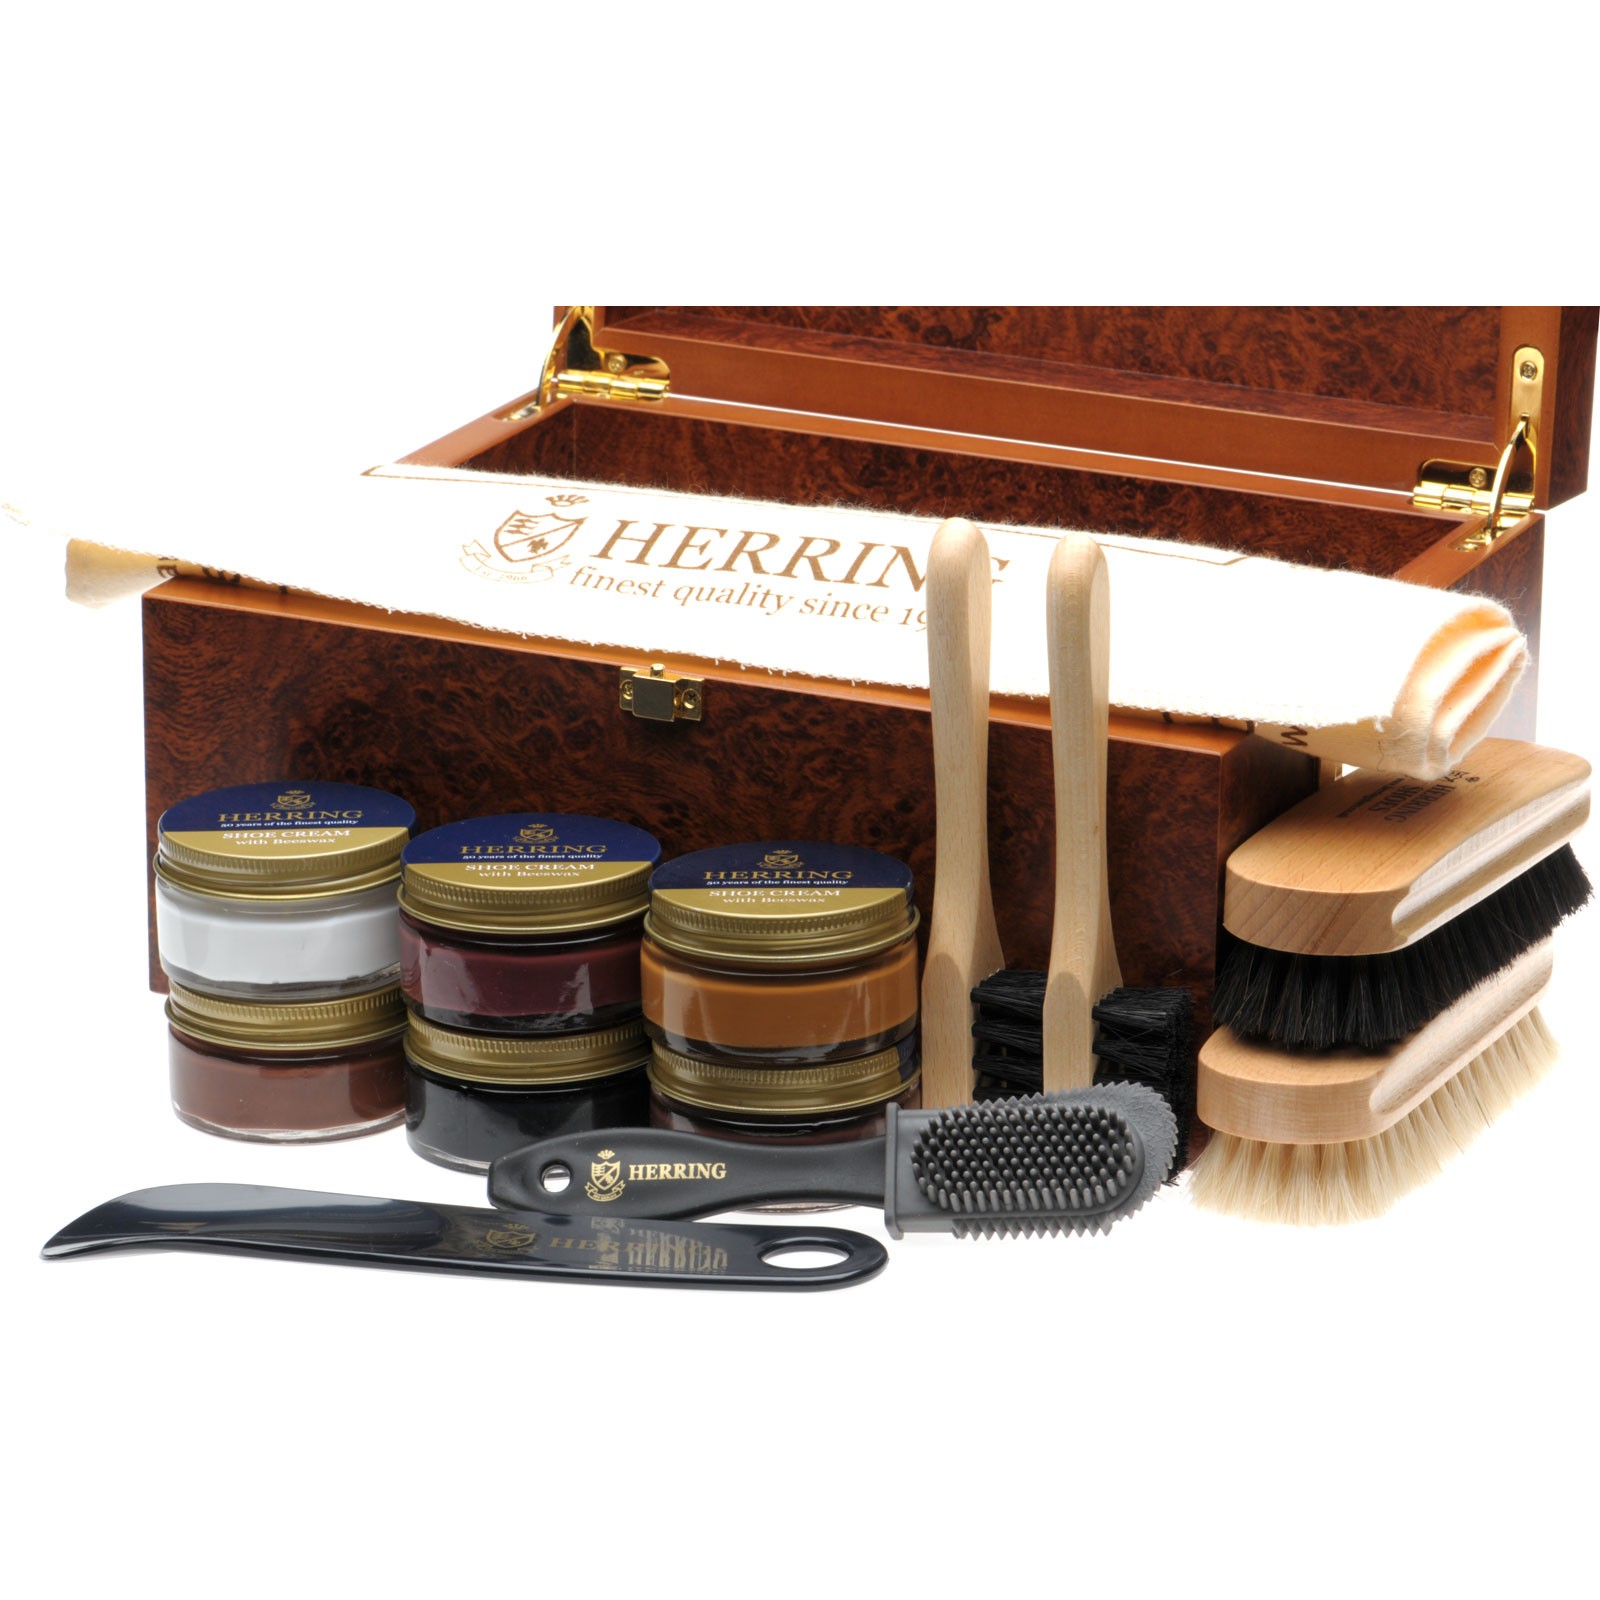 Herring shoes | Herring Shoe Care | Valet Box II in Red Walnut at ...